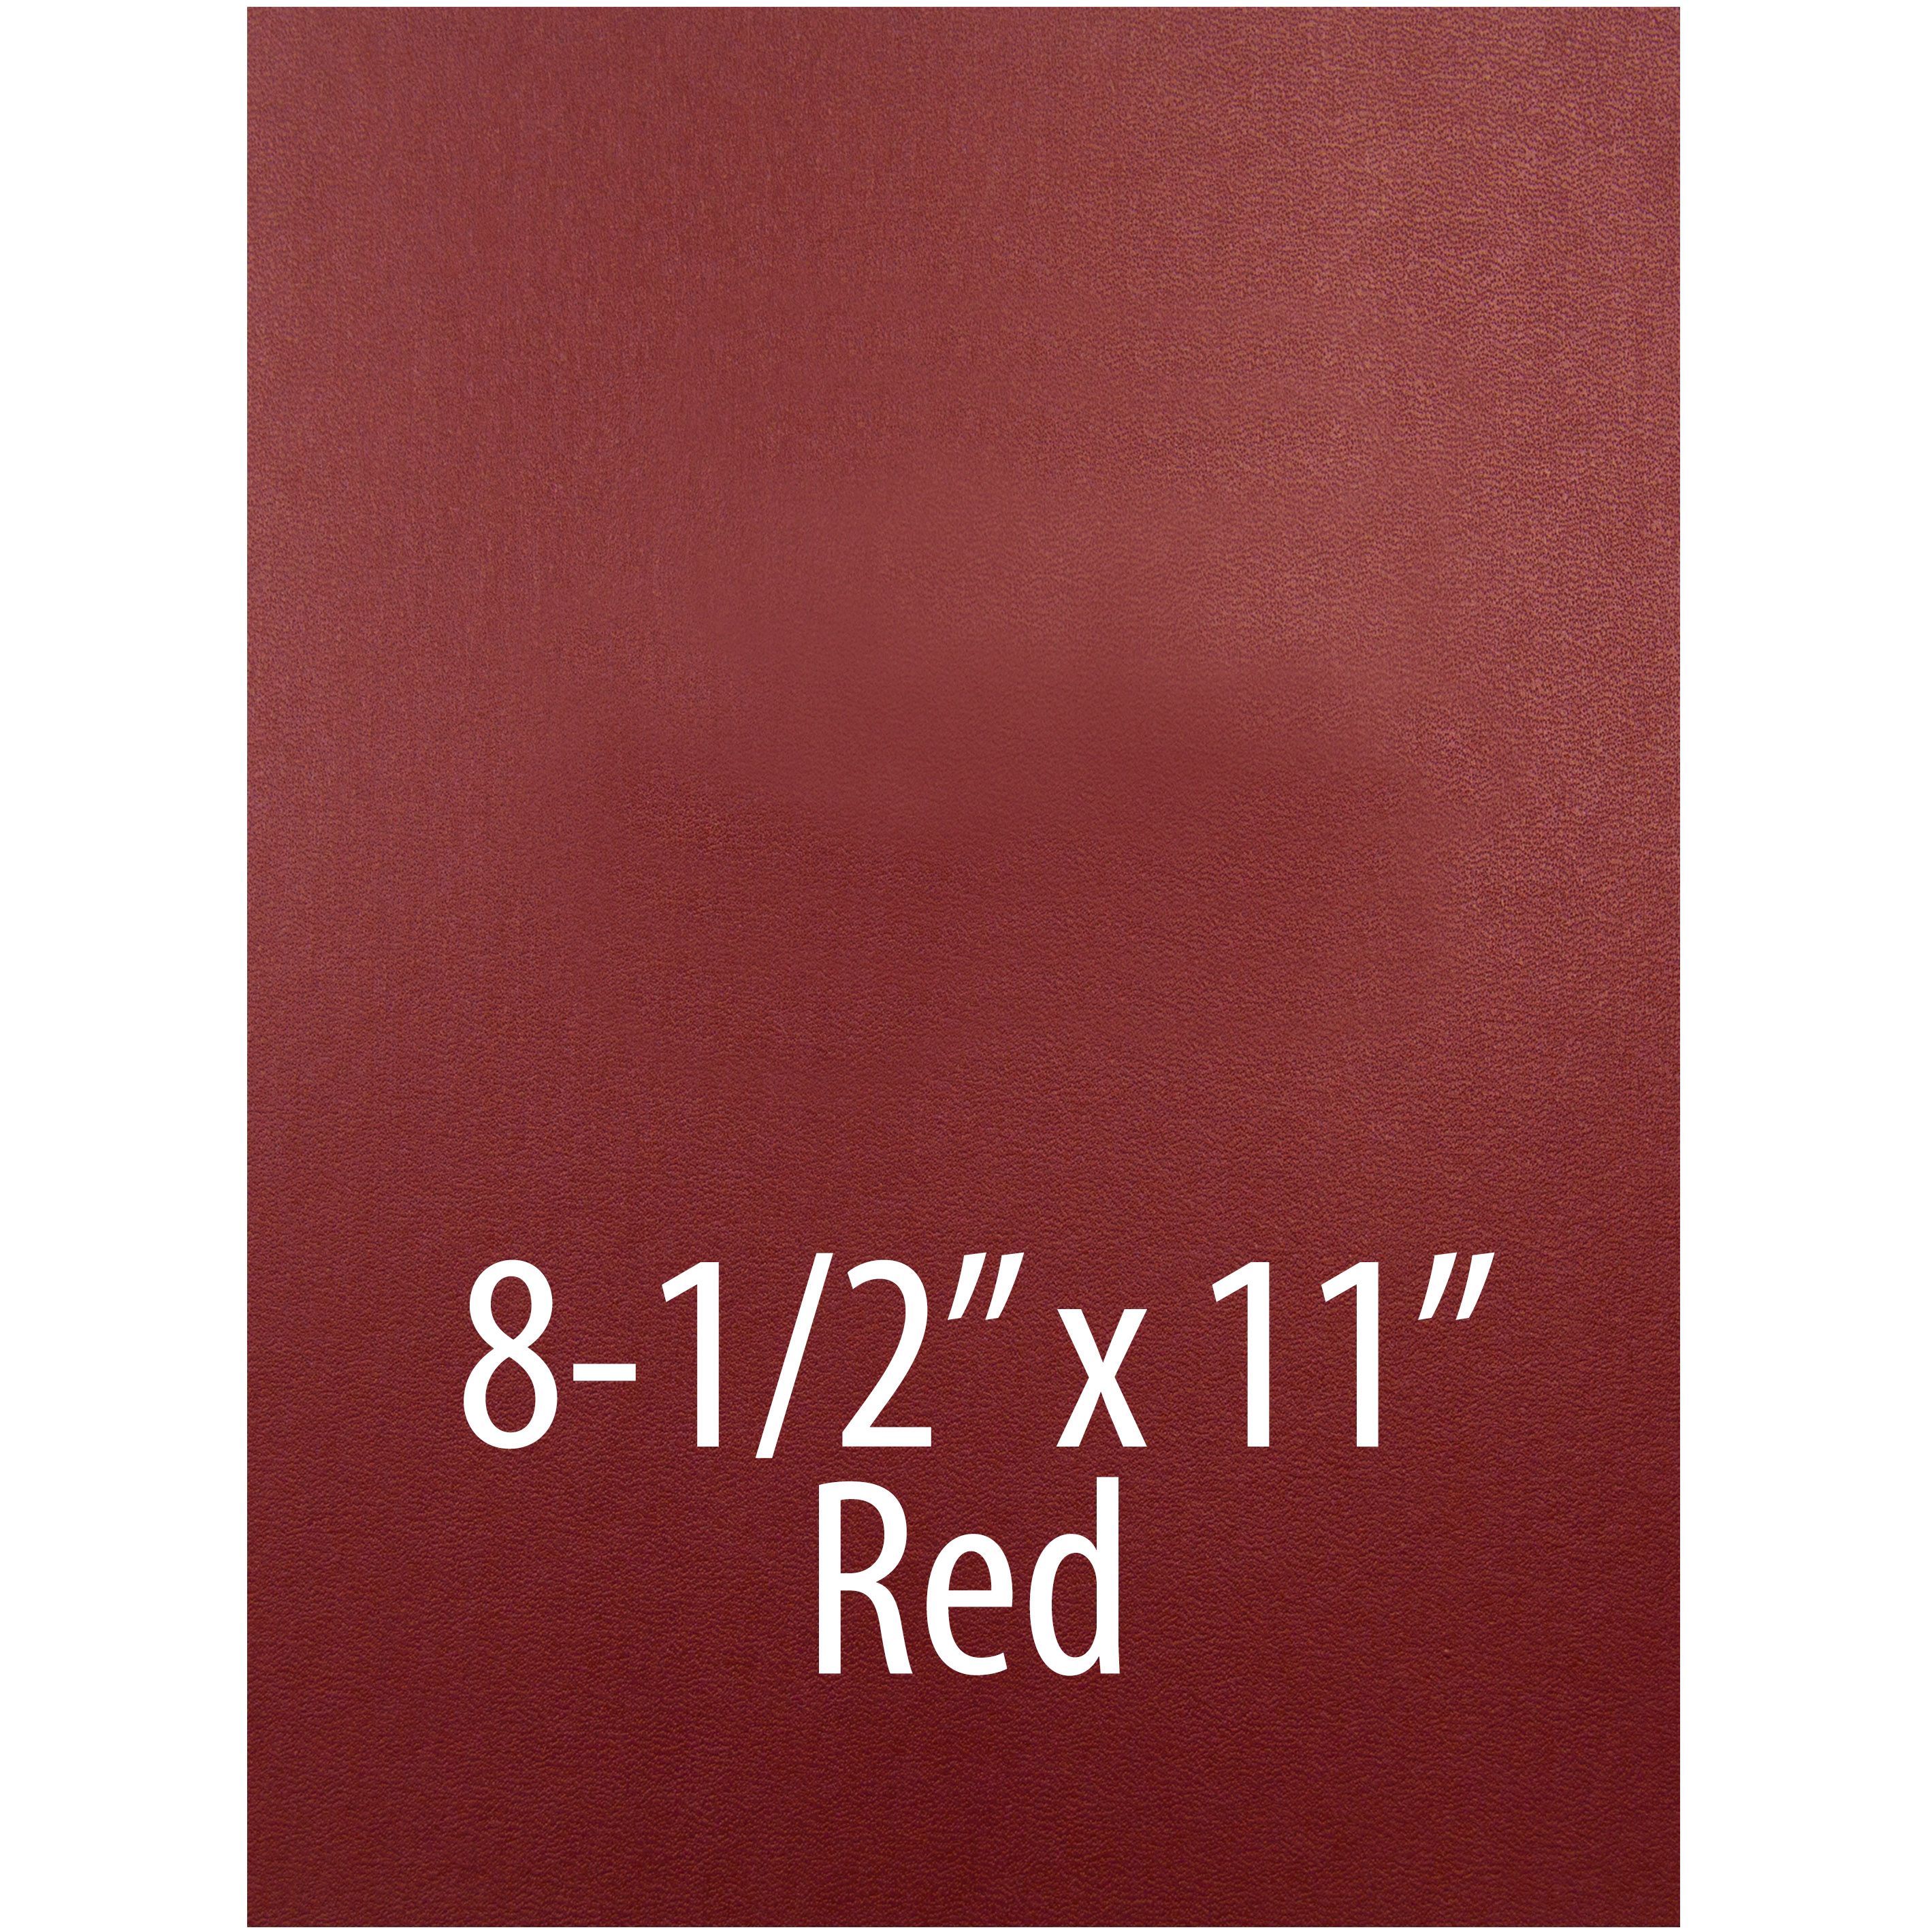 206 Composition Cover [No Window, Square Corner, Red, Unpunched, 8-1/2" X 11"] 100 /Pack (Discontinued)